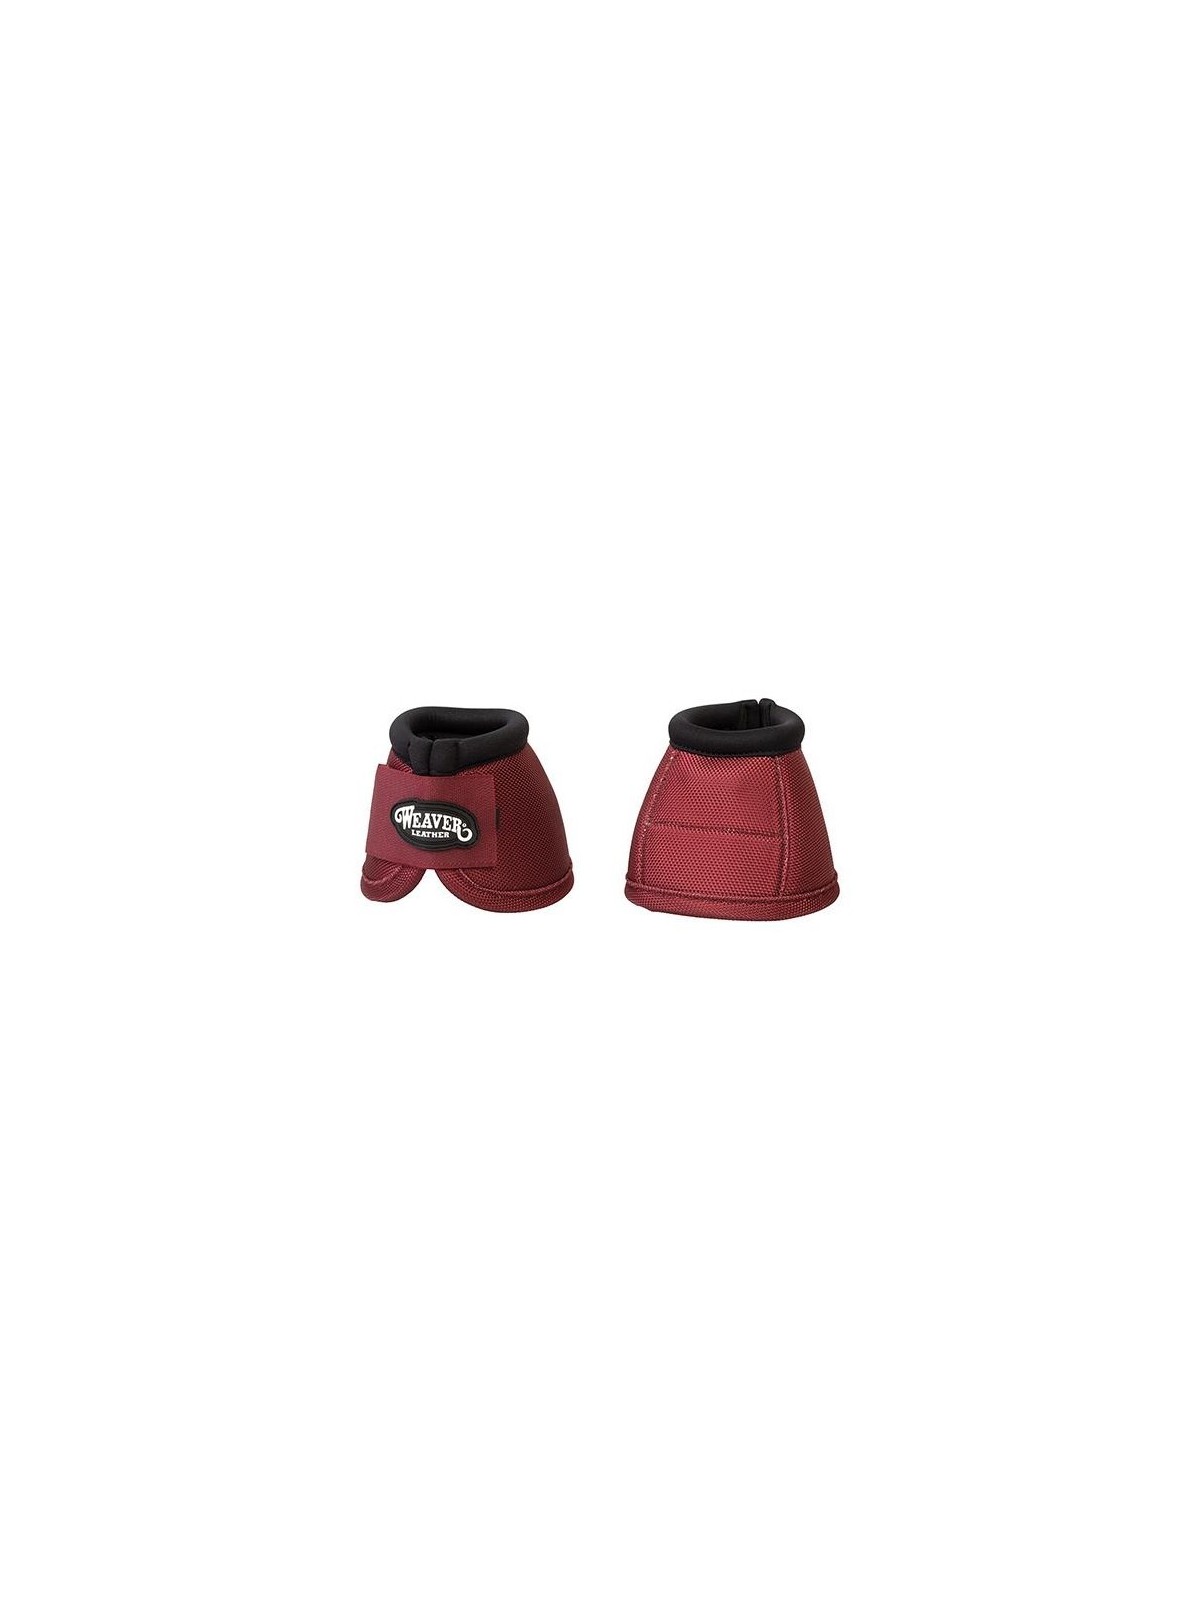 No-Turn Bell Boots burgundy red